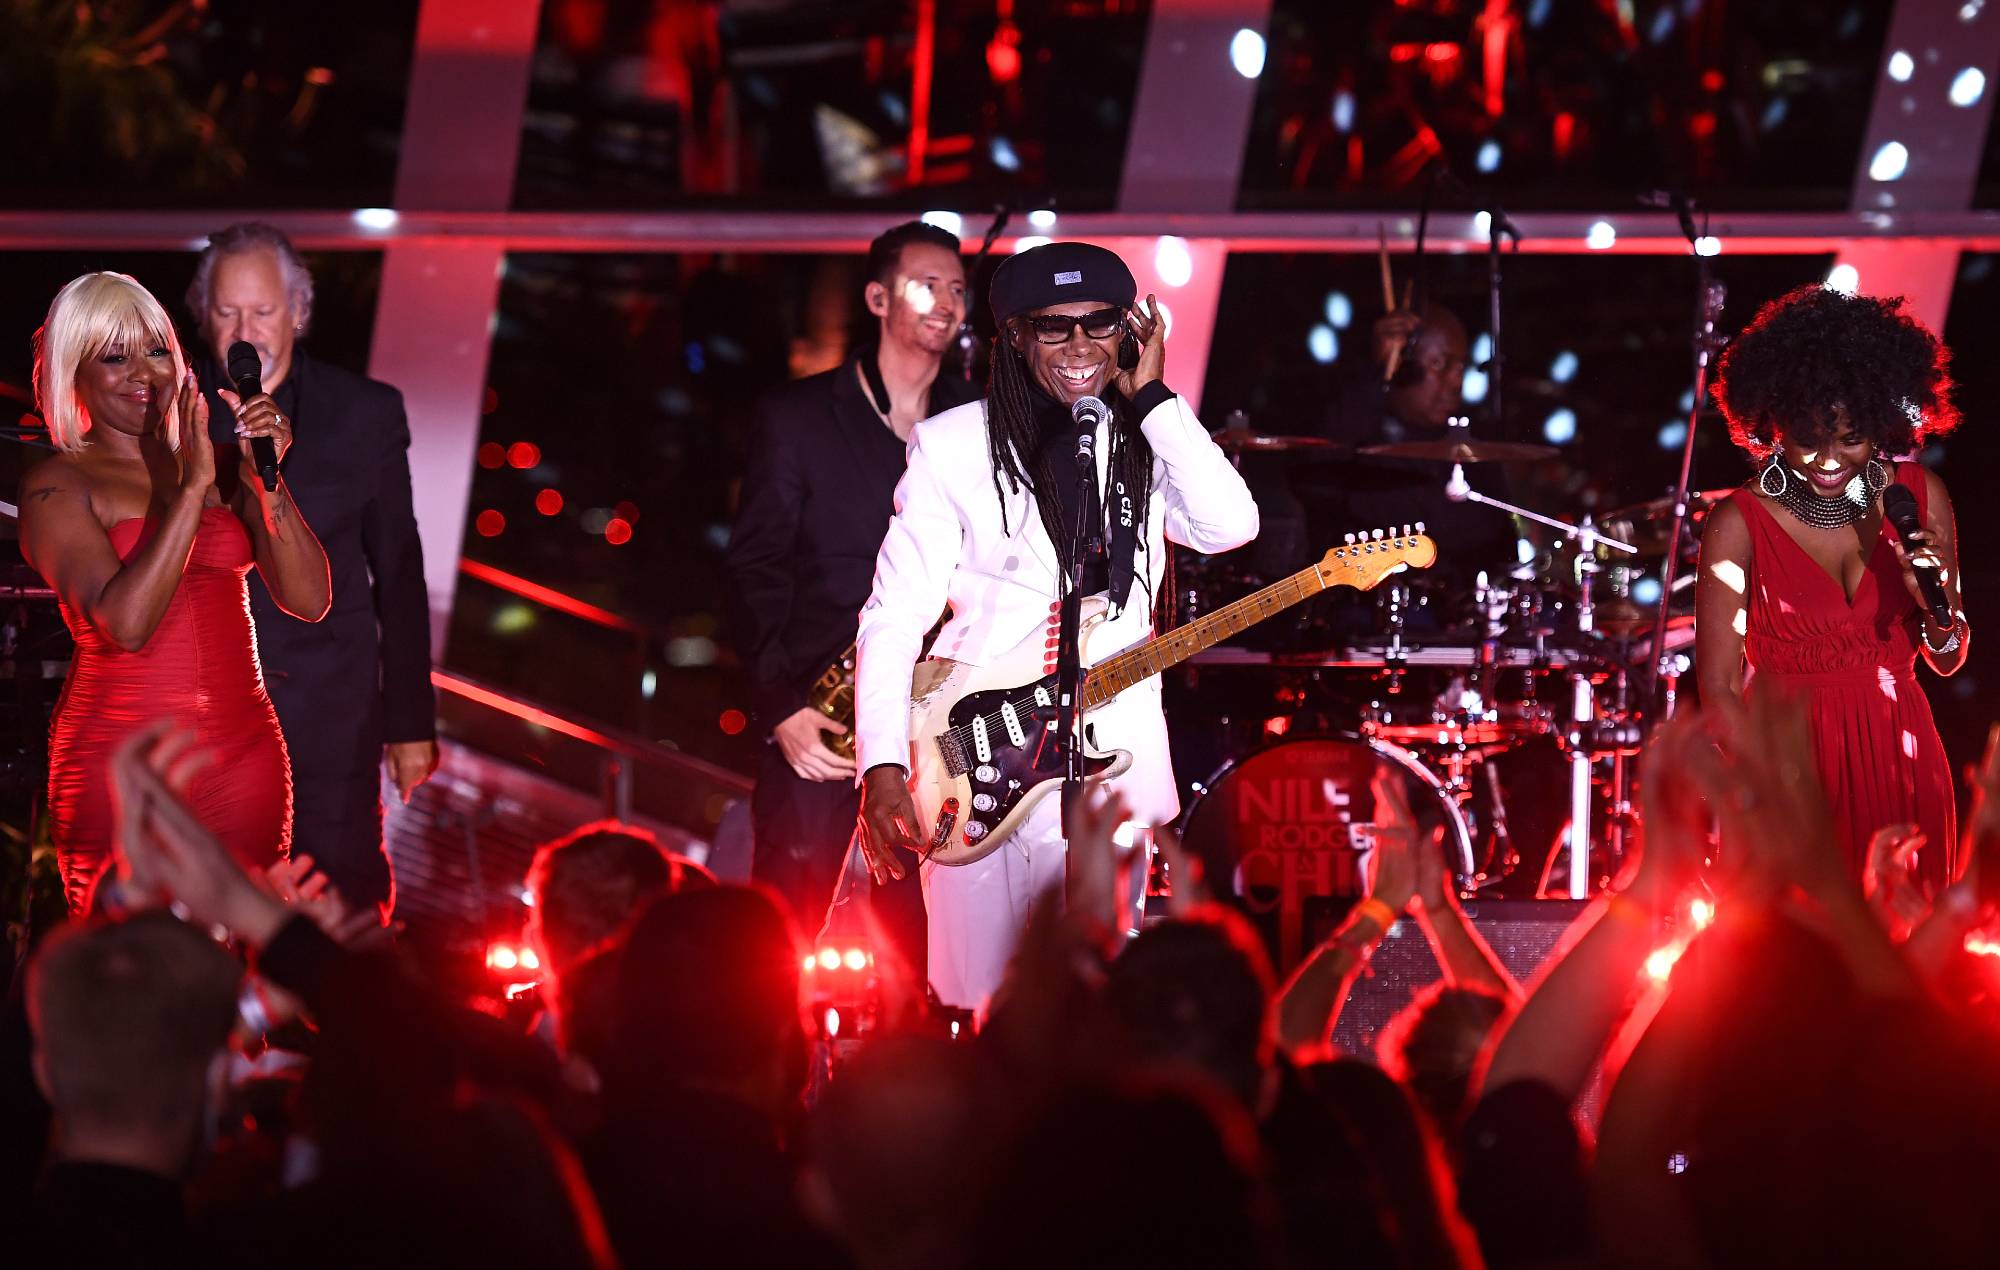 Nile Rodgers on a long and illustrious career: “Most of my records are failures!”